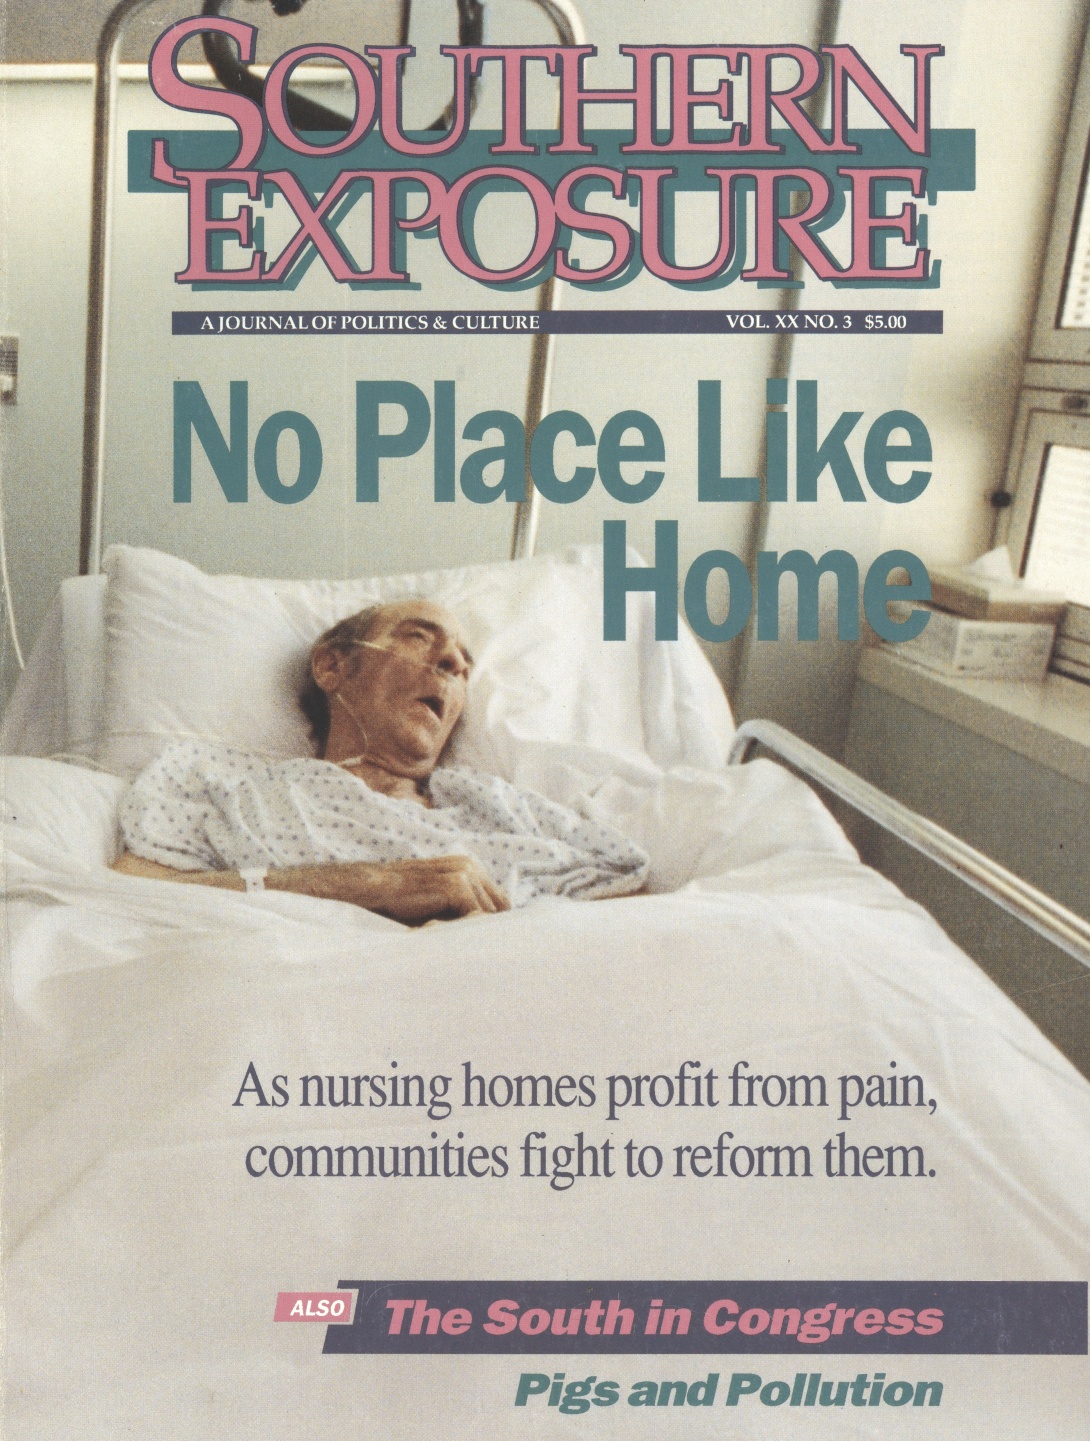 Magazine cover with photo of elderly man lying in hospital or nursing home bed, mouth open, looking out the window. Text reads "No Place Like Home"